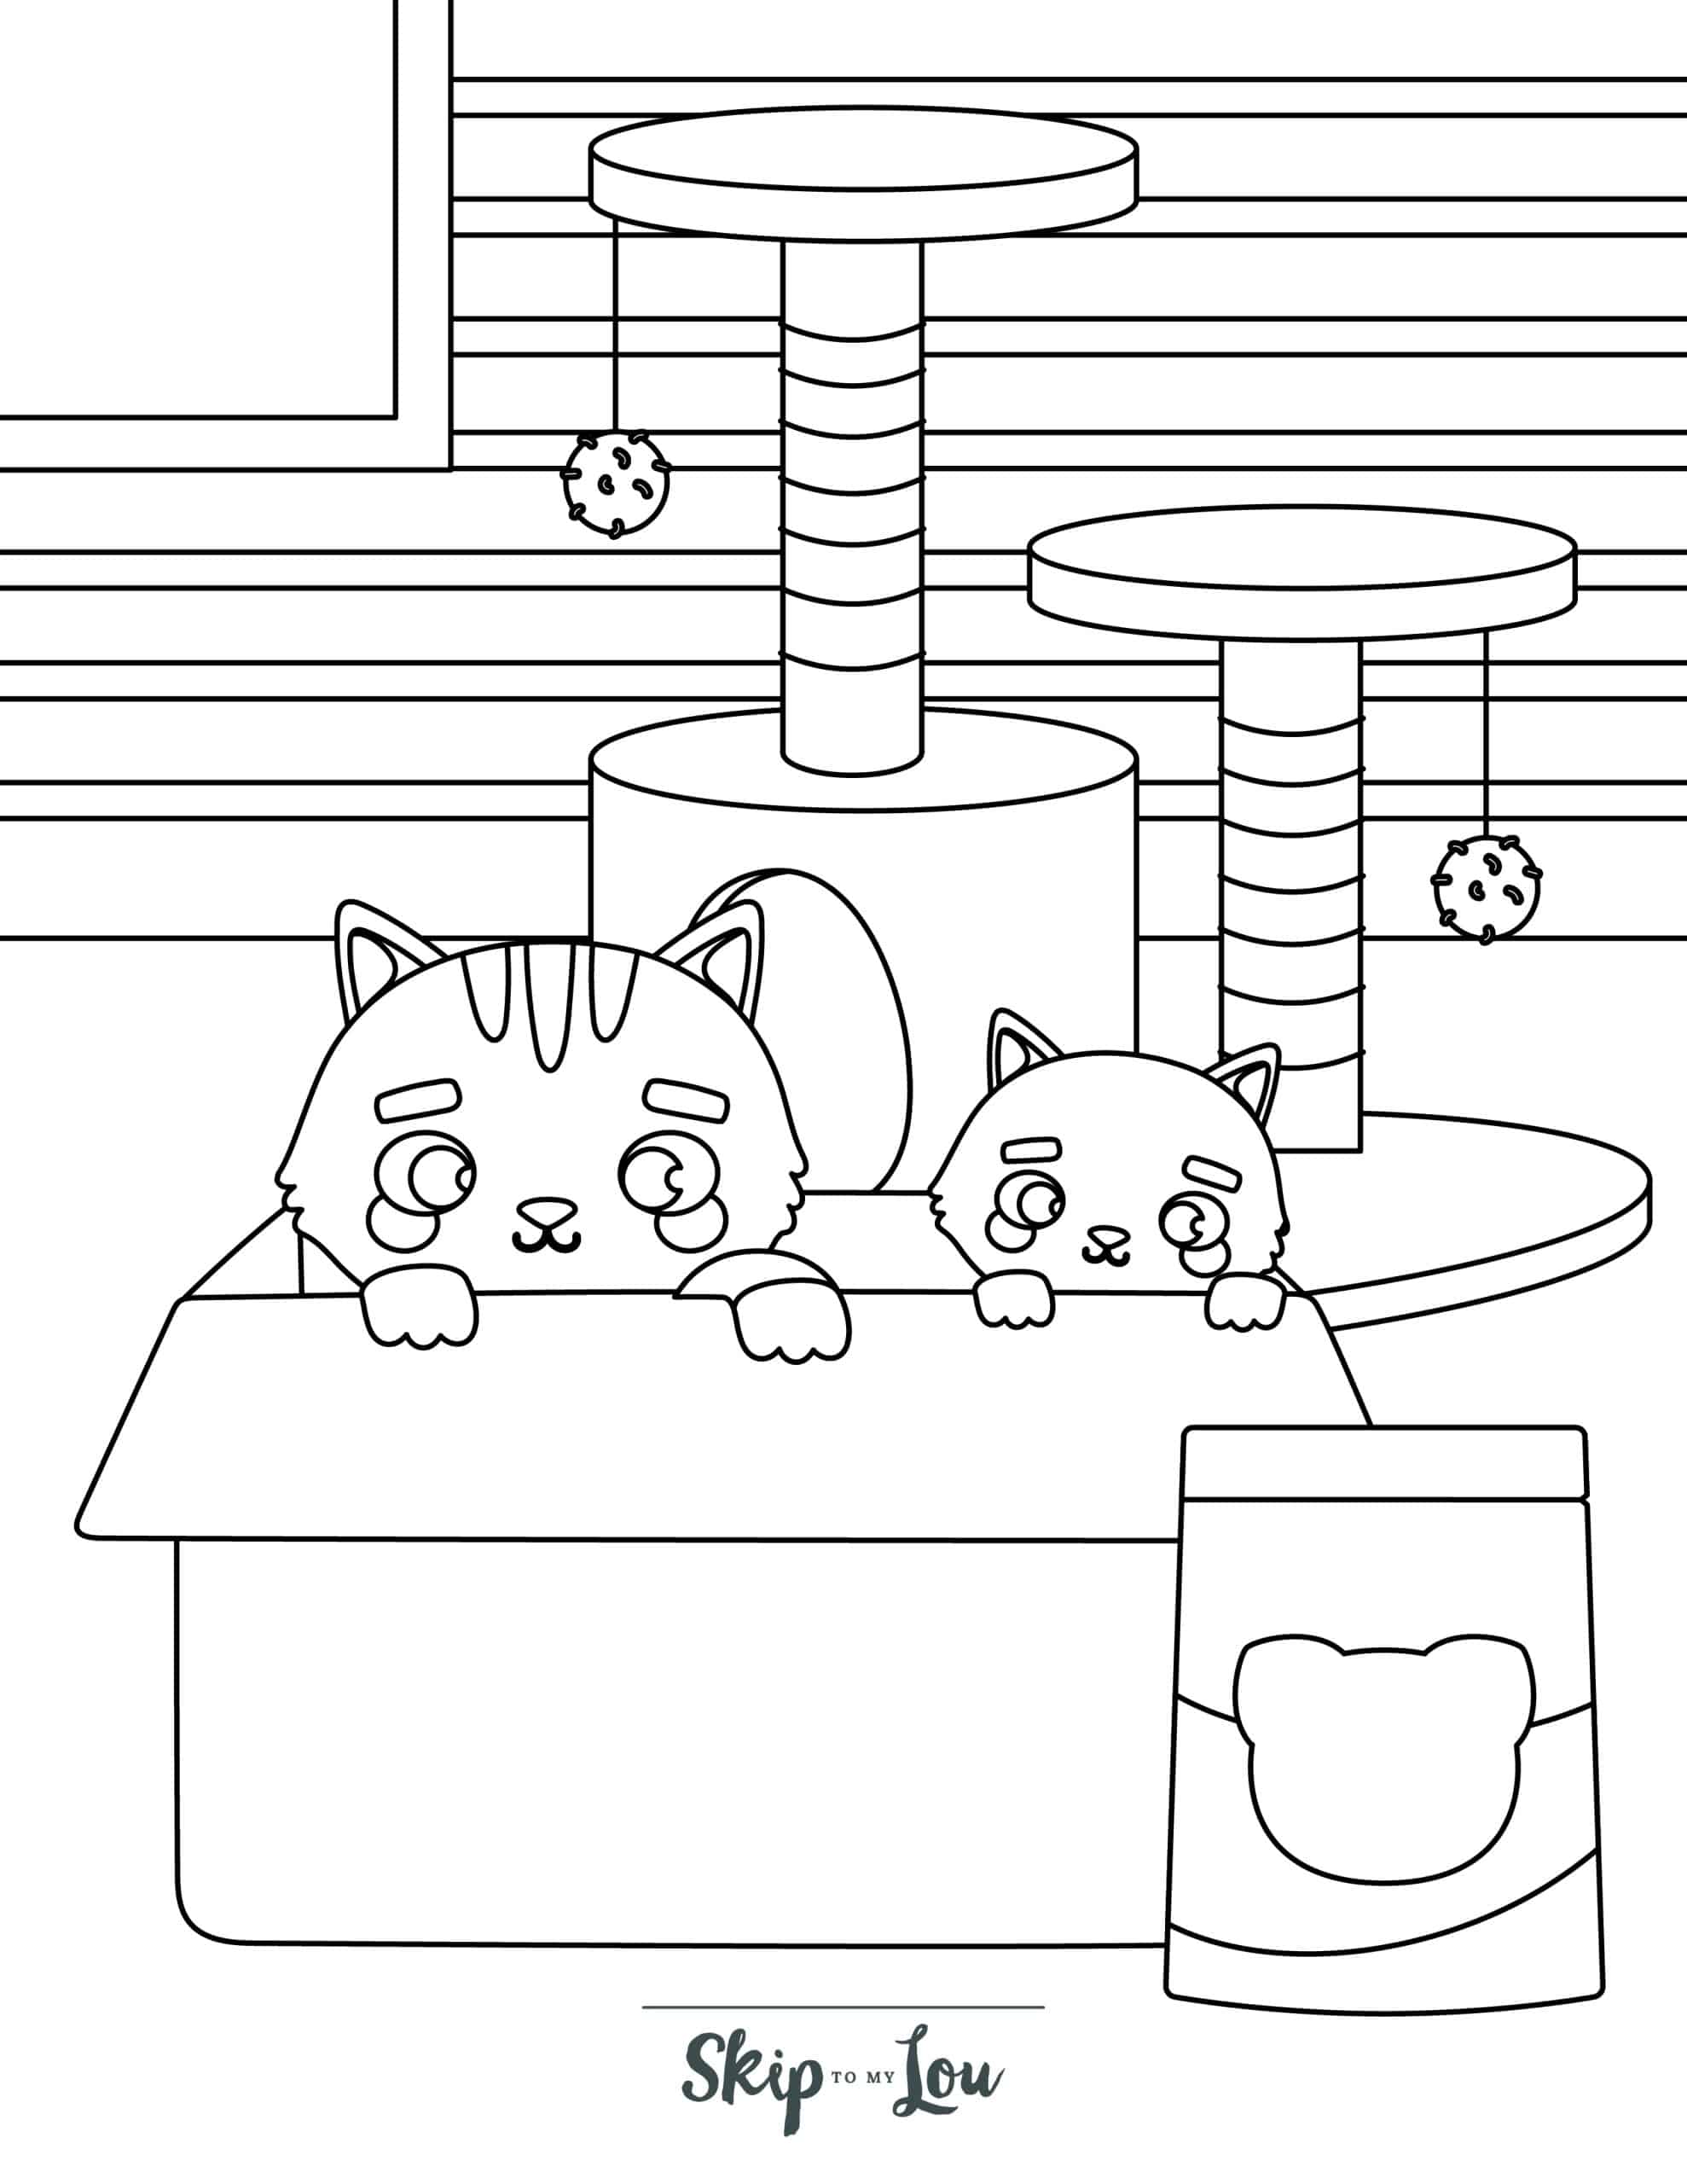 Free printable kitten coloring pages for kids skip to my lou